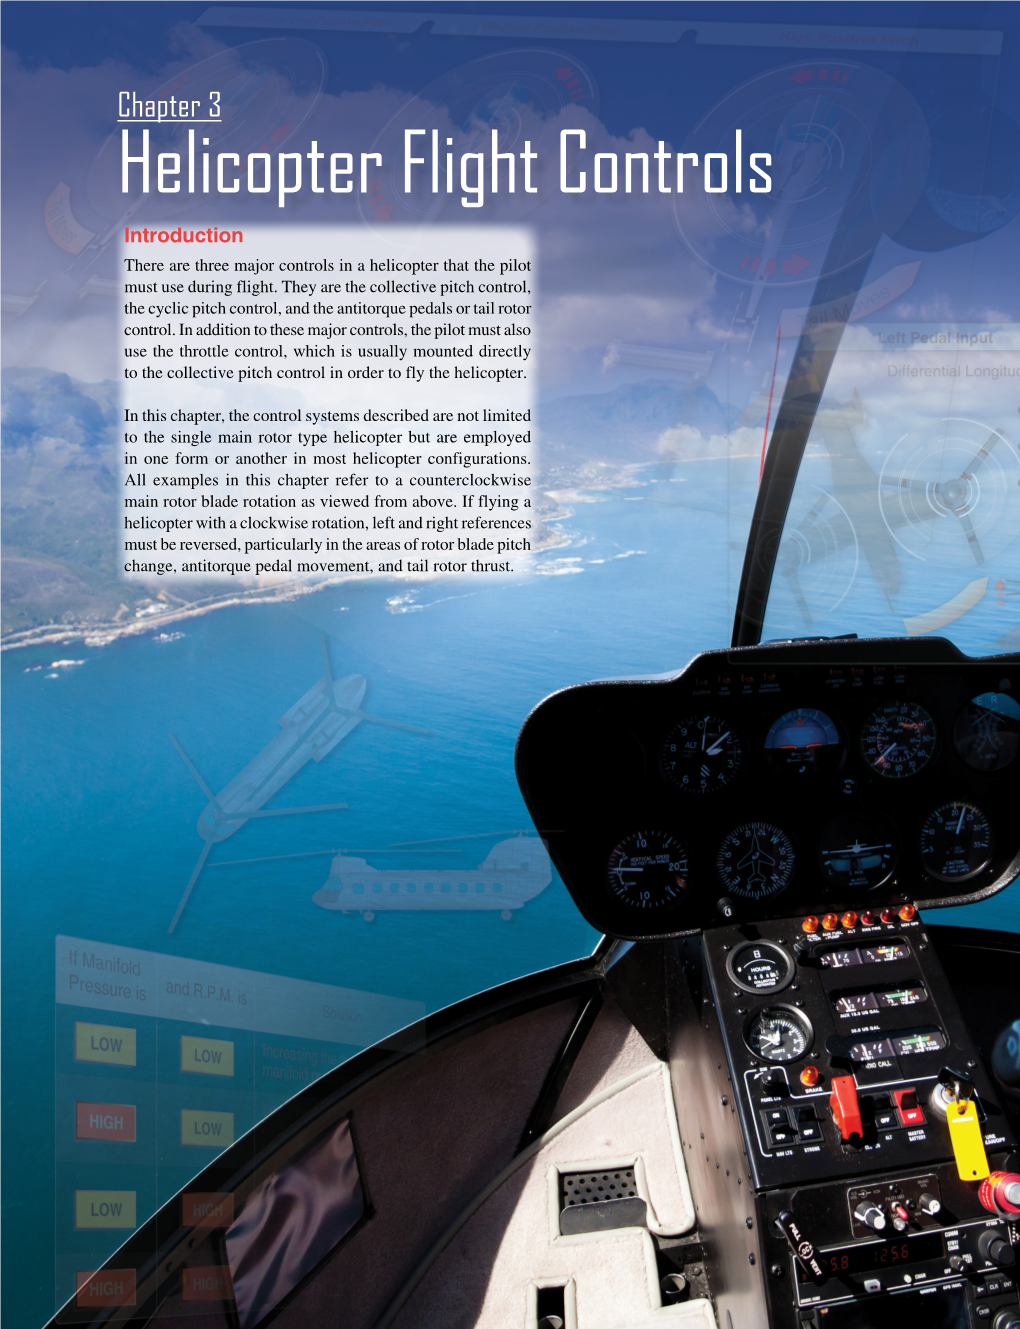 Chapter 3 Helicopter Flight Controls Introduction There Are Three Major Controls in a Helicopter That the Pilot Must Use During Flight